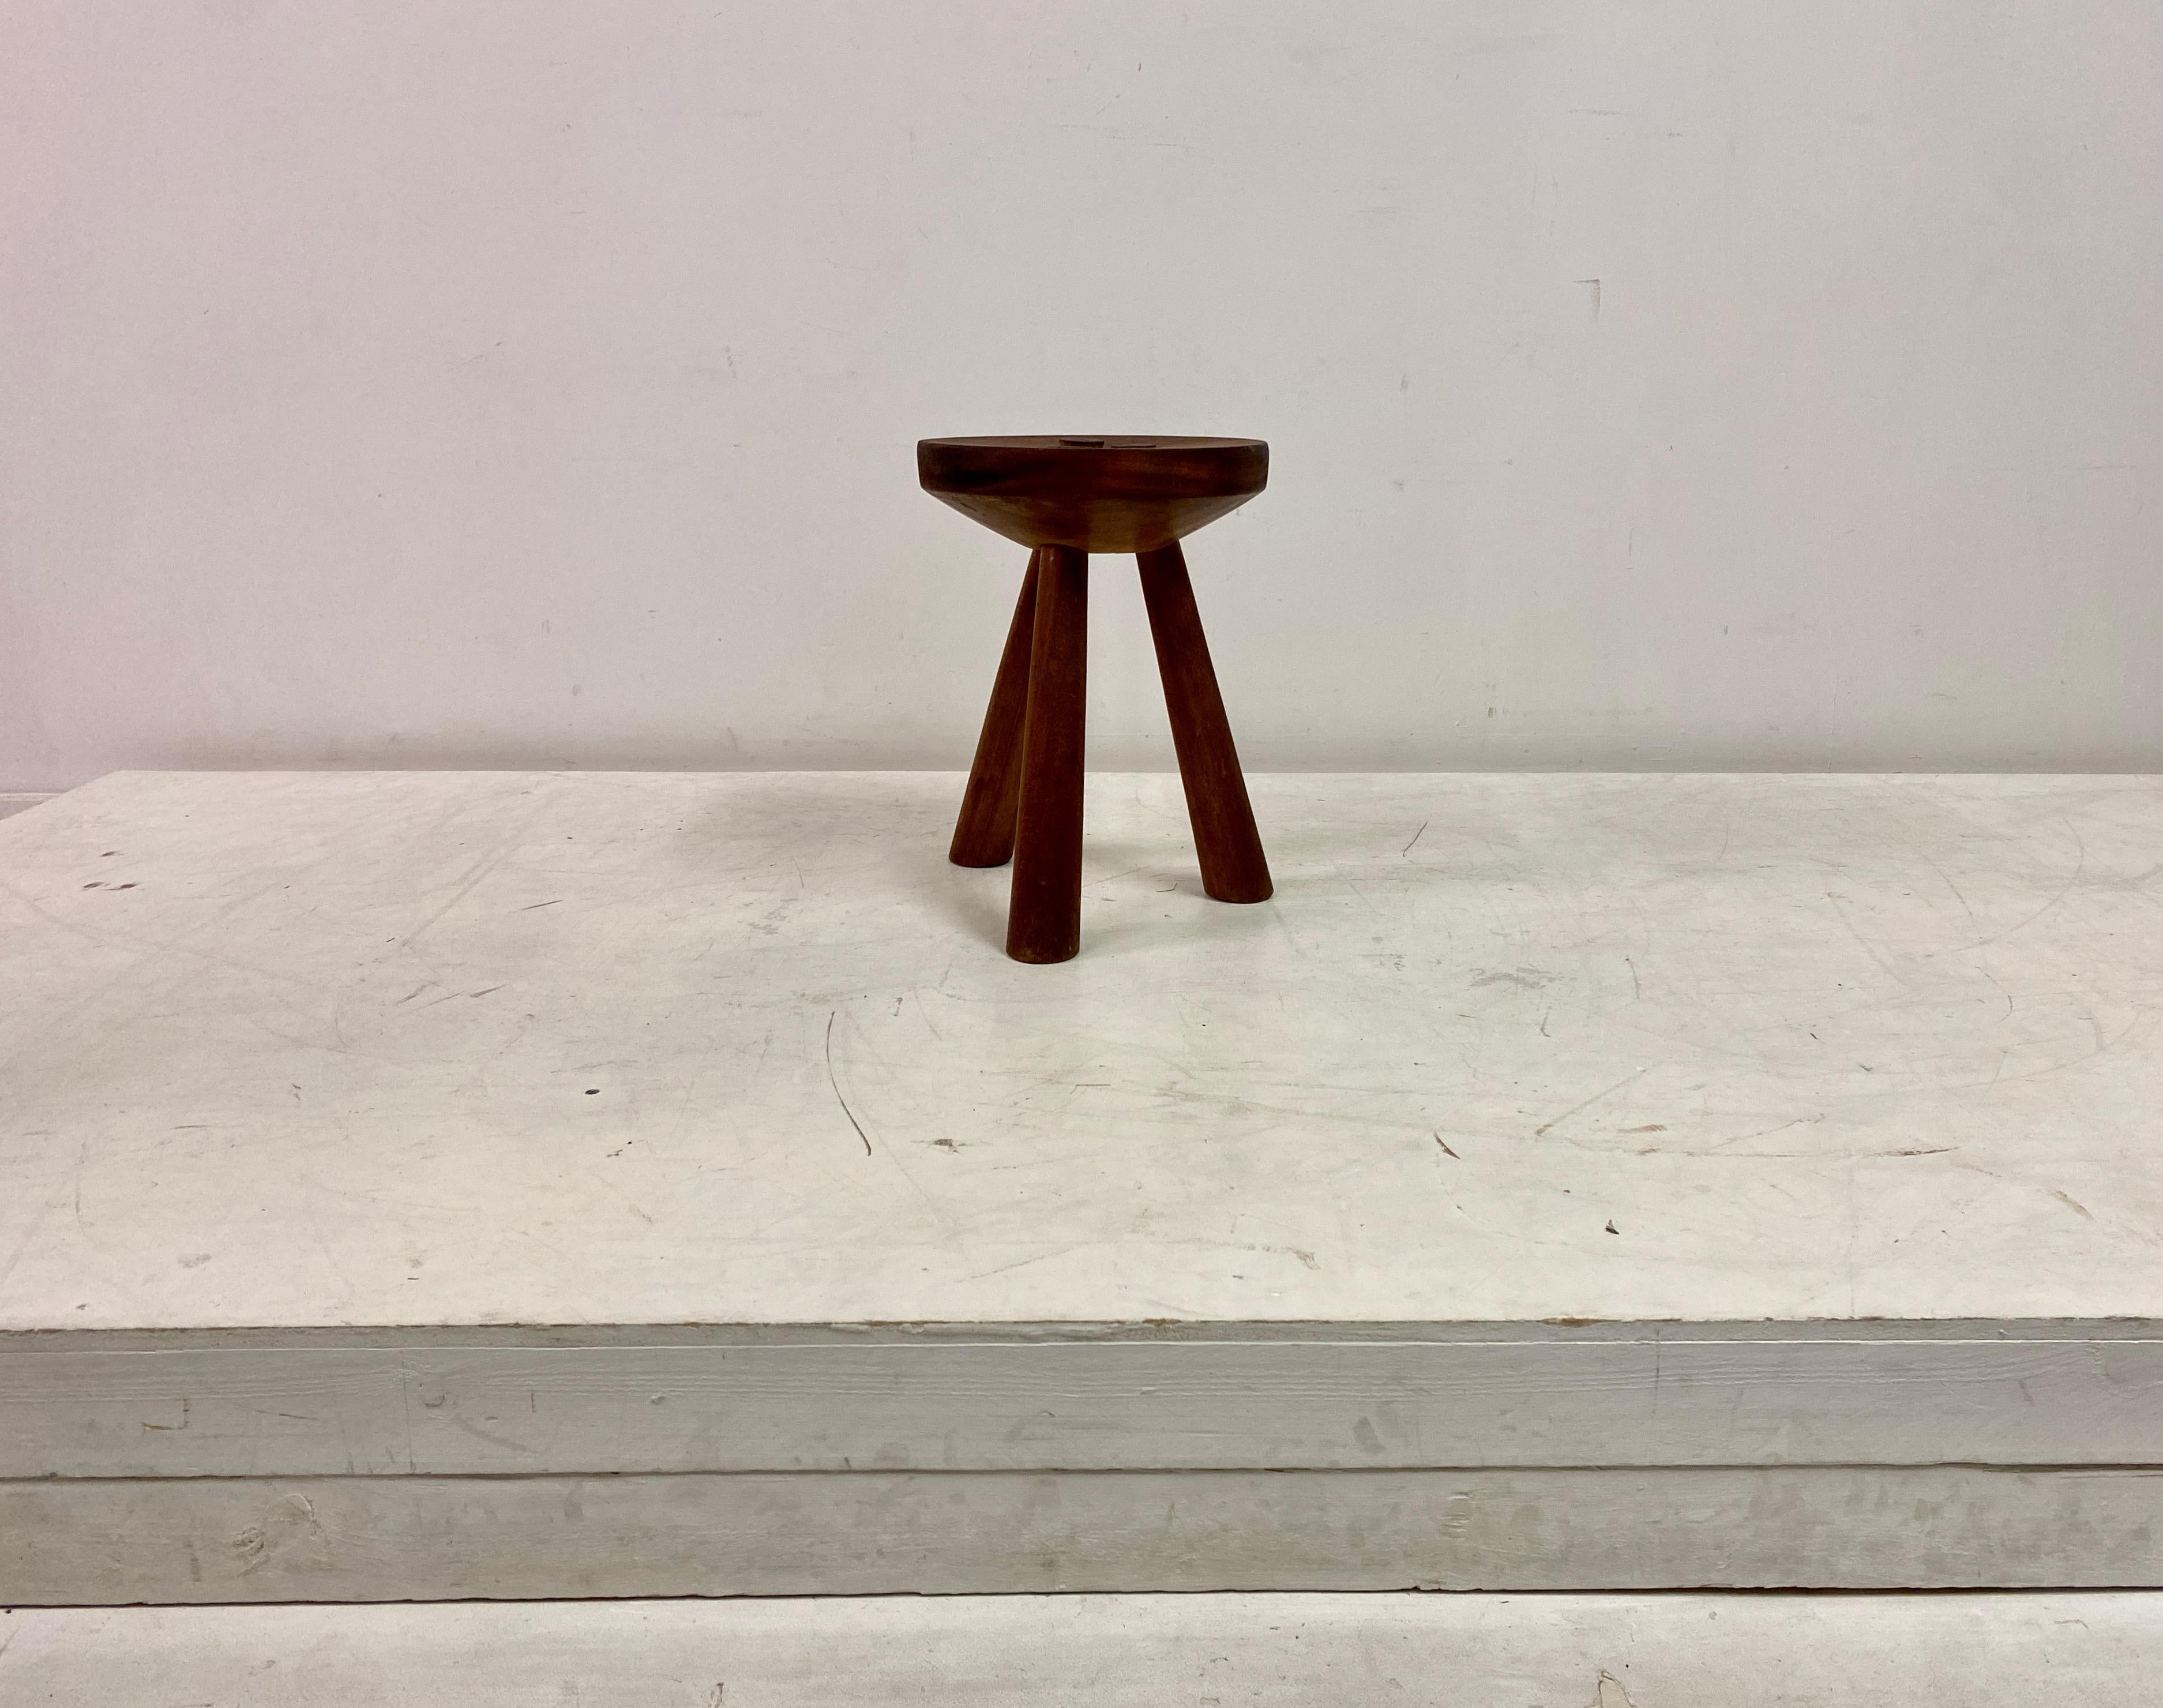 Stool or side table

Three legs

Mid to late 20th Century